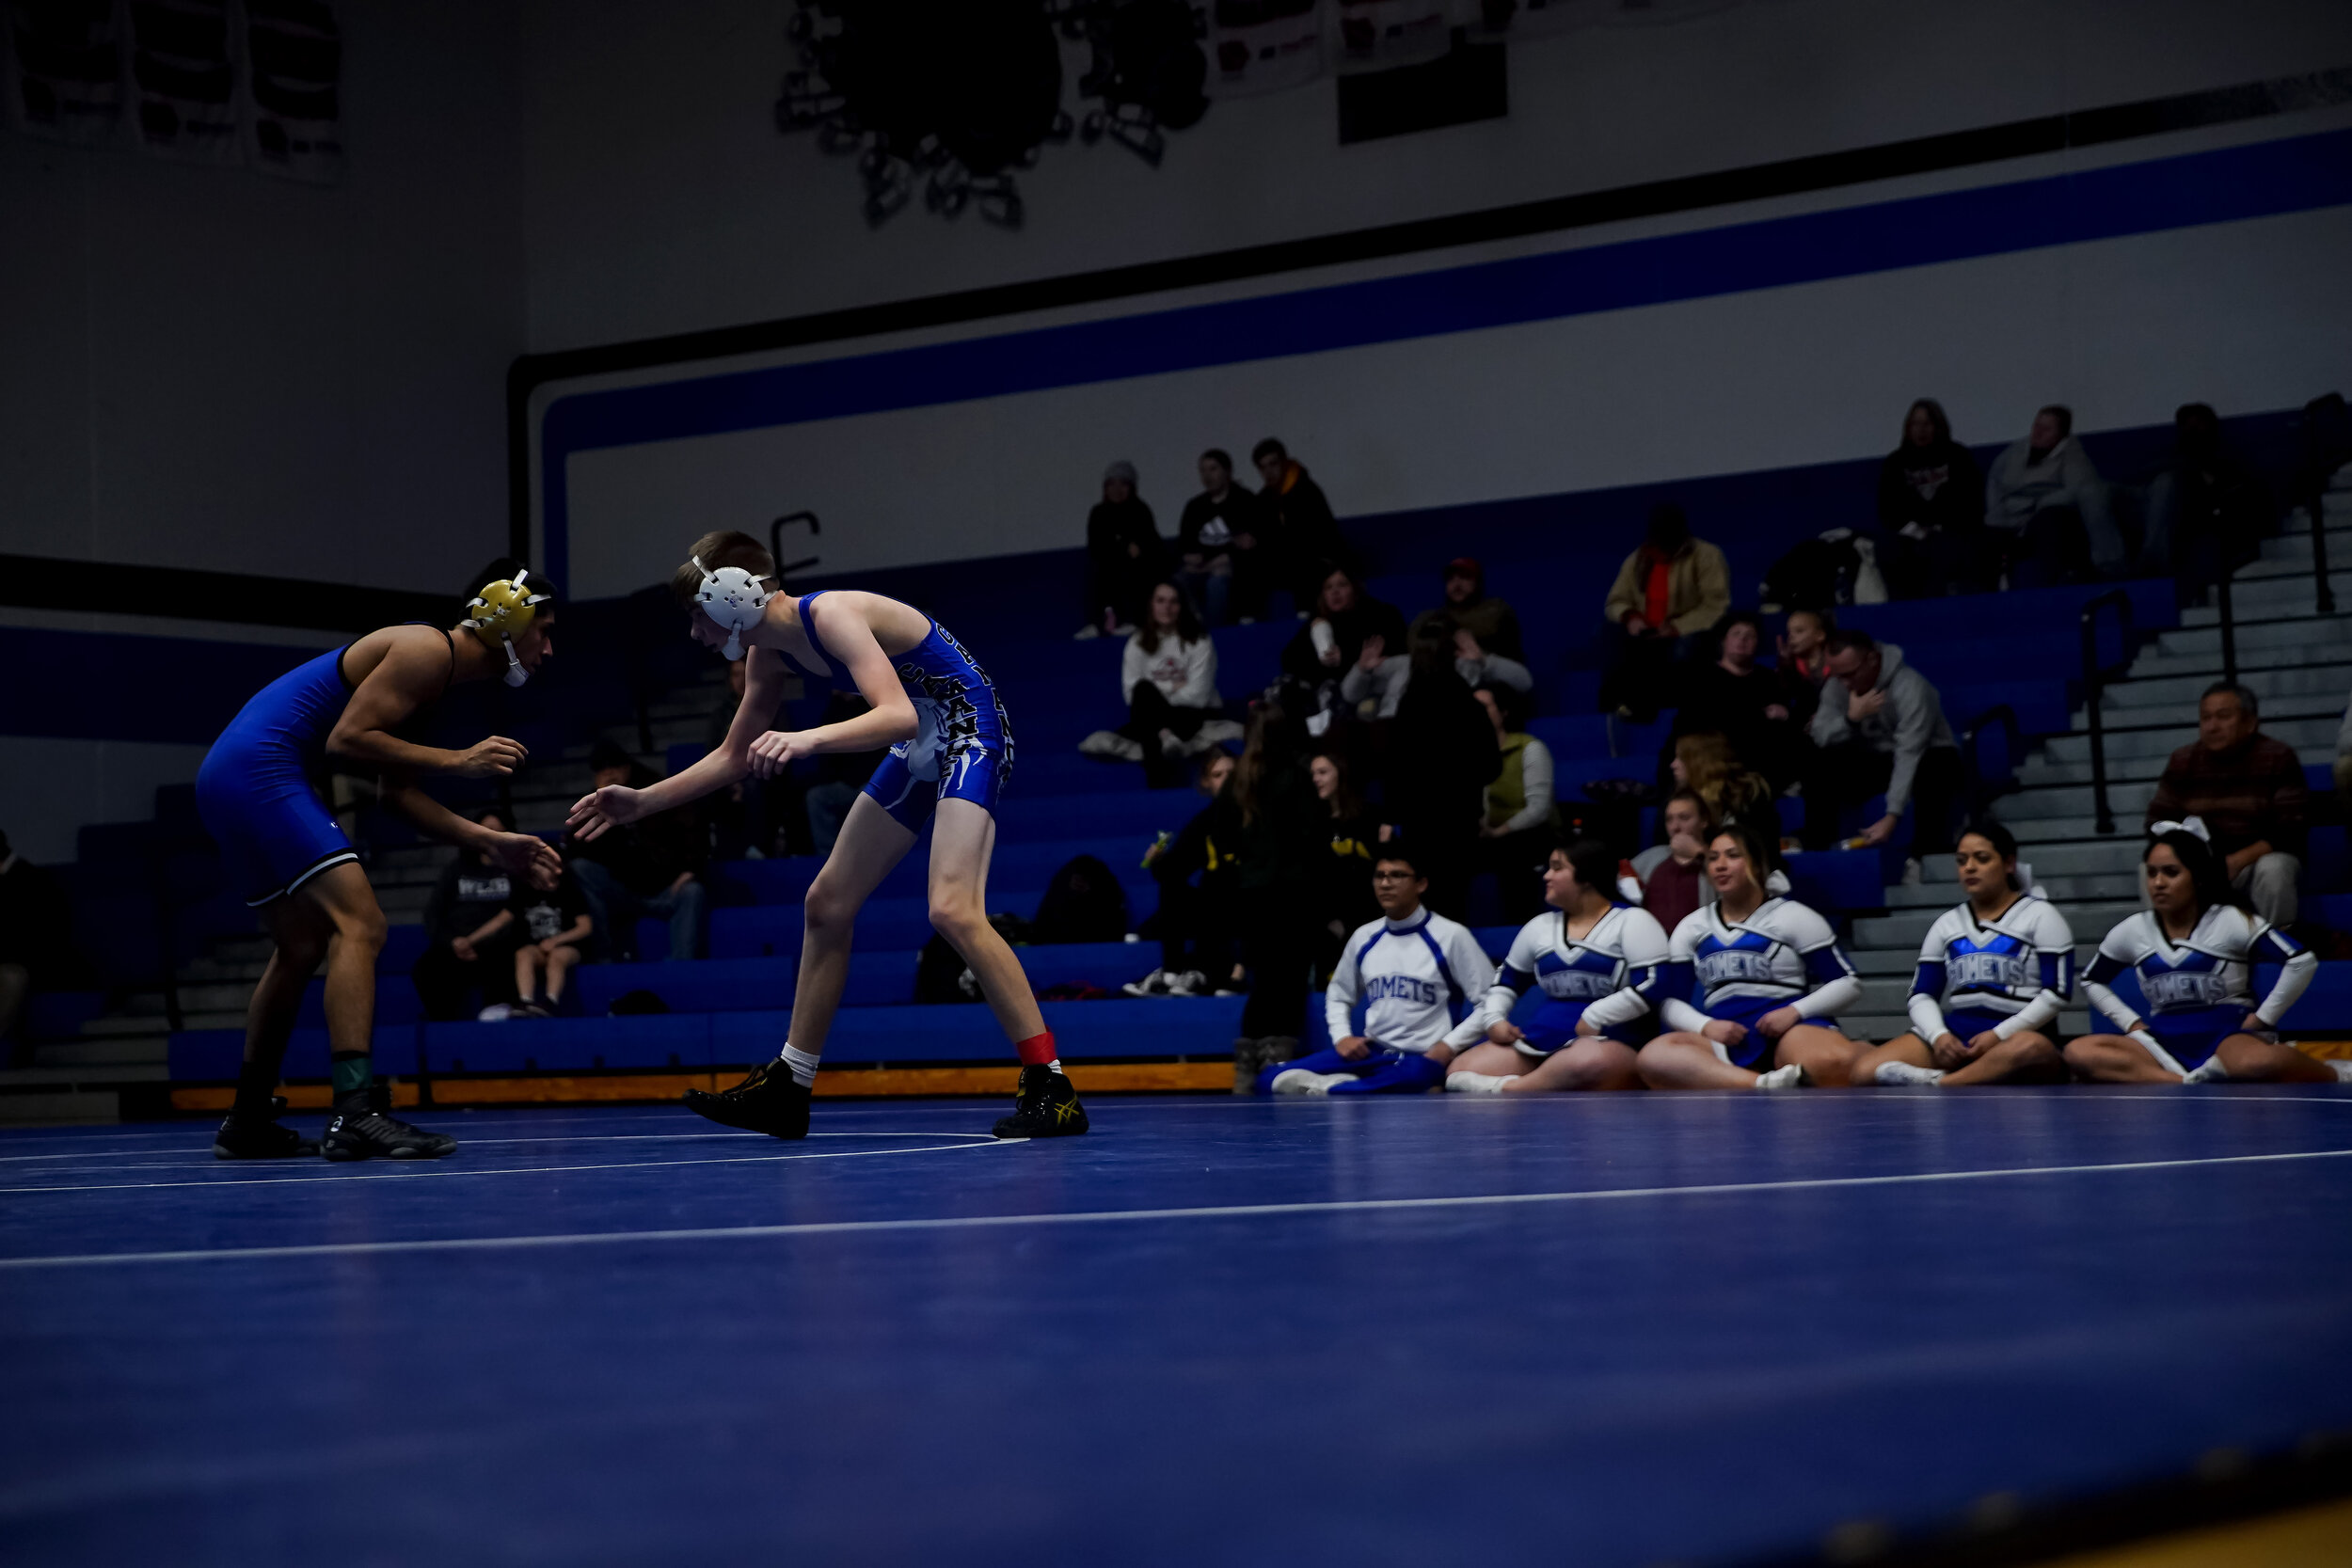   A wrestling match at West Liberty High School in West Liberty, IA. 2020. The town is in Muscatine County, Iowa, and as of the 2010 U.S. Census was the only city in the state to have a majority Hispanic population.  